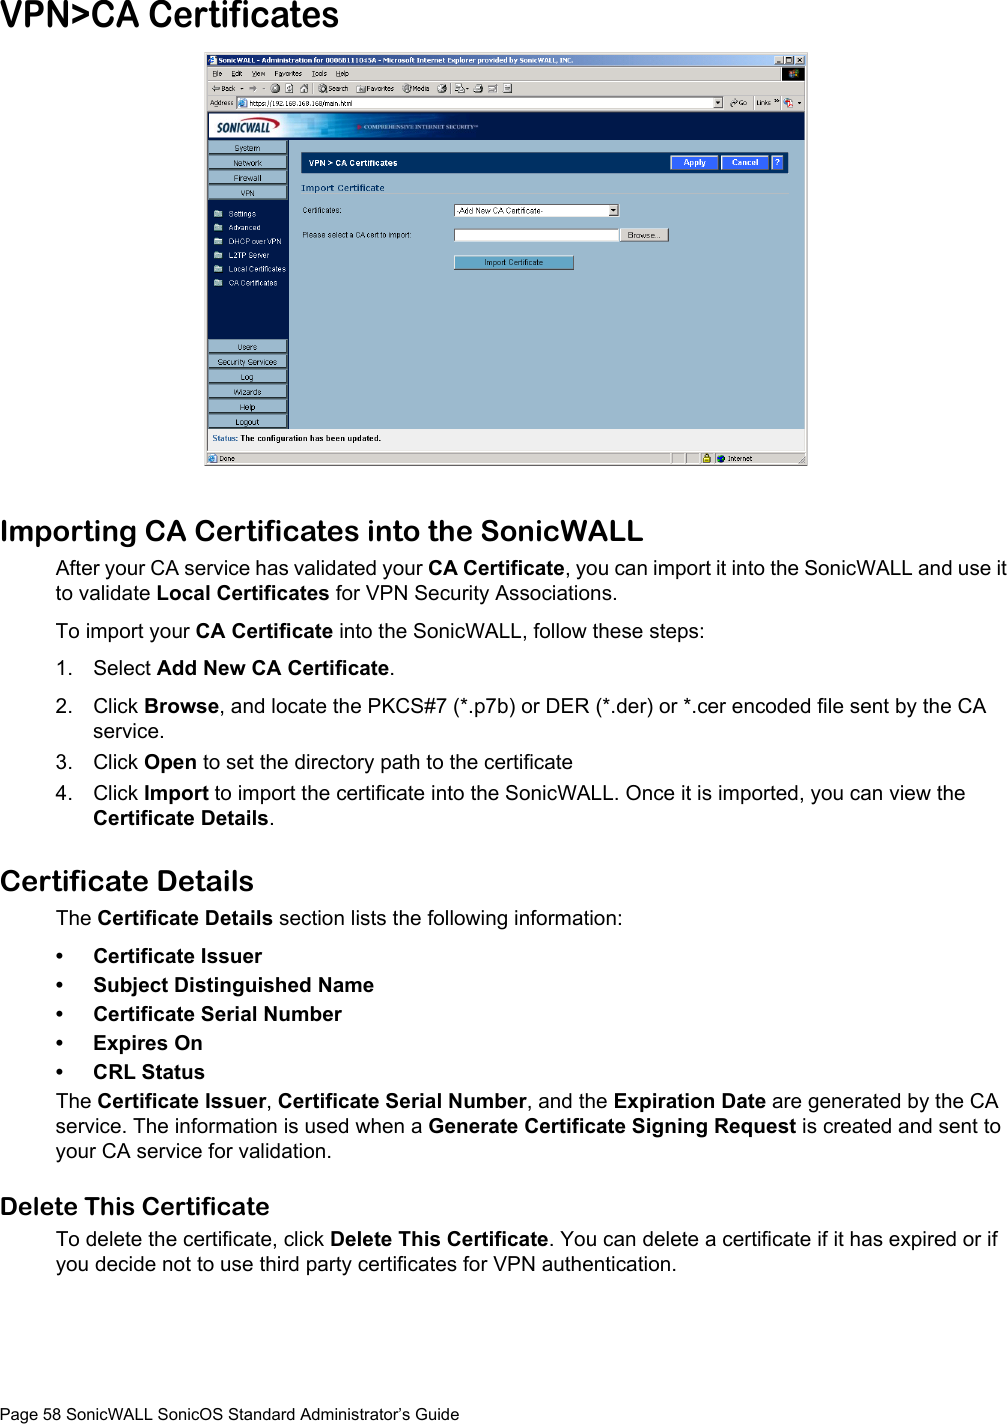 Page 58 SonicWALL SonicOS Standard Administrator’s GuideVPN&gt;CA CertificatesImporting CA Certificates into the SonicWALLAfter your CA service has validated your CA Certificate, you can import it into the SonicWALL and use it to validate Local Certificates for VPN Security Associations. To import your CA Certificate into the SonicWALL, follow these steps:1. Select Add New CA Certificate. 2. Click Browse, and locate the PKCS#7 (*.p7b) or DER (*.der) or *.cer encoded file sent by the CA service. 3. Click Open to set the directory path to the certificate4. Click Import to import the certificate into the SonicWALL. Once it is imported, you can view the Certificate Details.Certificate DetailsThe Certificate Details section lists the following information:• Certificate Issuer• Subject Distinguished Name• Certificate Serial Number• Expires On• CRL StatusThe Certificate Issuer, Certificate Serial Number, and the Expiration Date are generated by the CA service. The information is used when a Generate Certificate Signing Request is created and sent to your CA service for validation.Delete This CertificateTo delete the certificate, click Delete This Certificate. You can delete a certificate if it has expired or if you decide not to use third party certificates for VPN authentication.